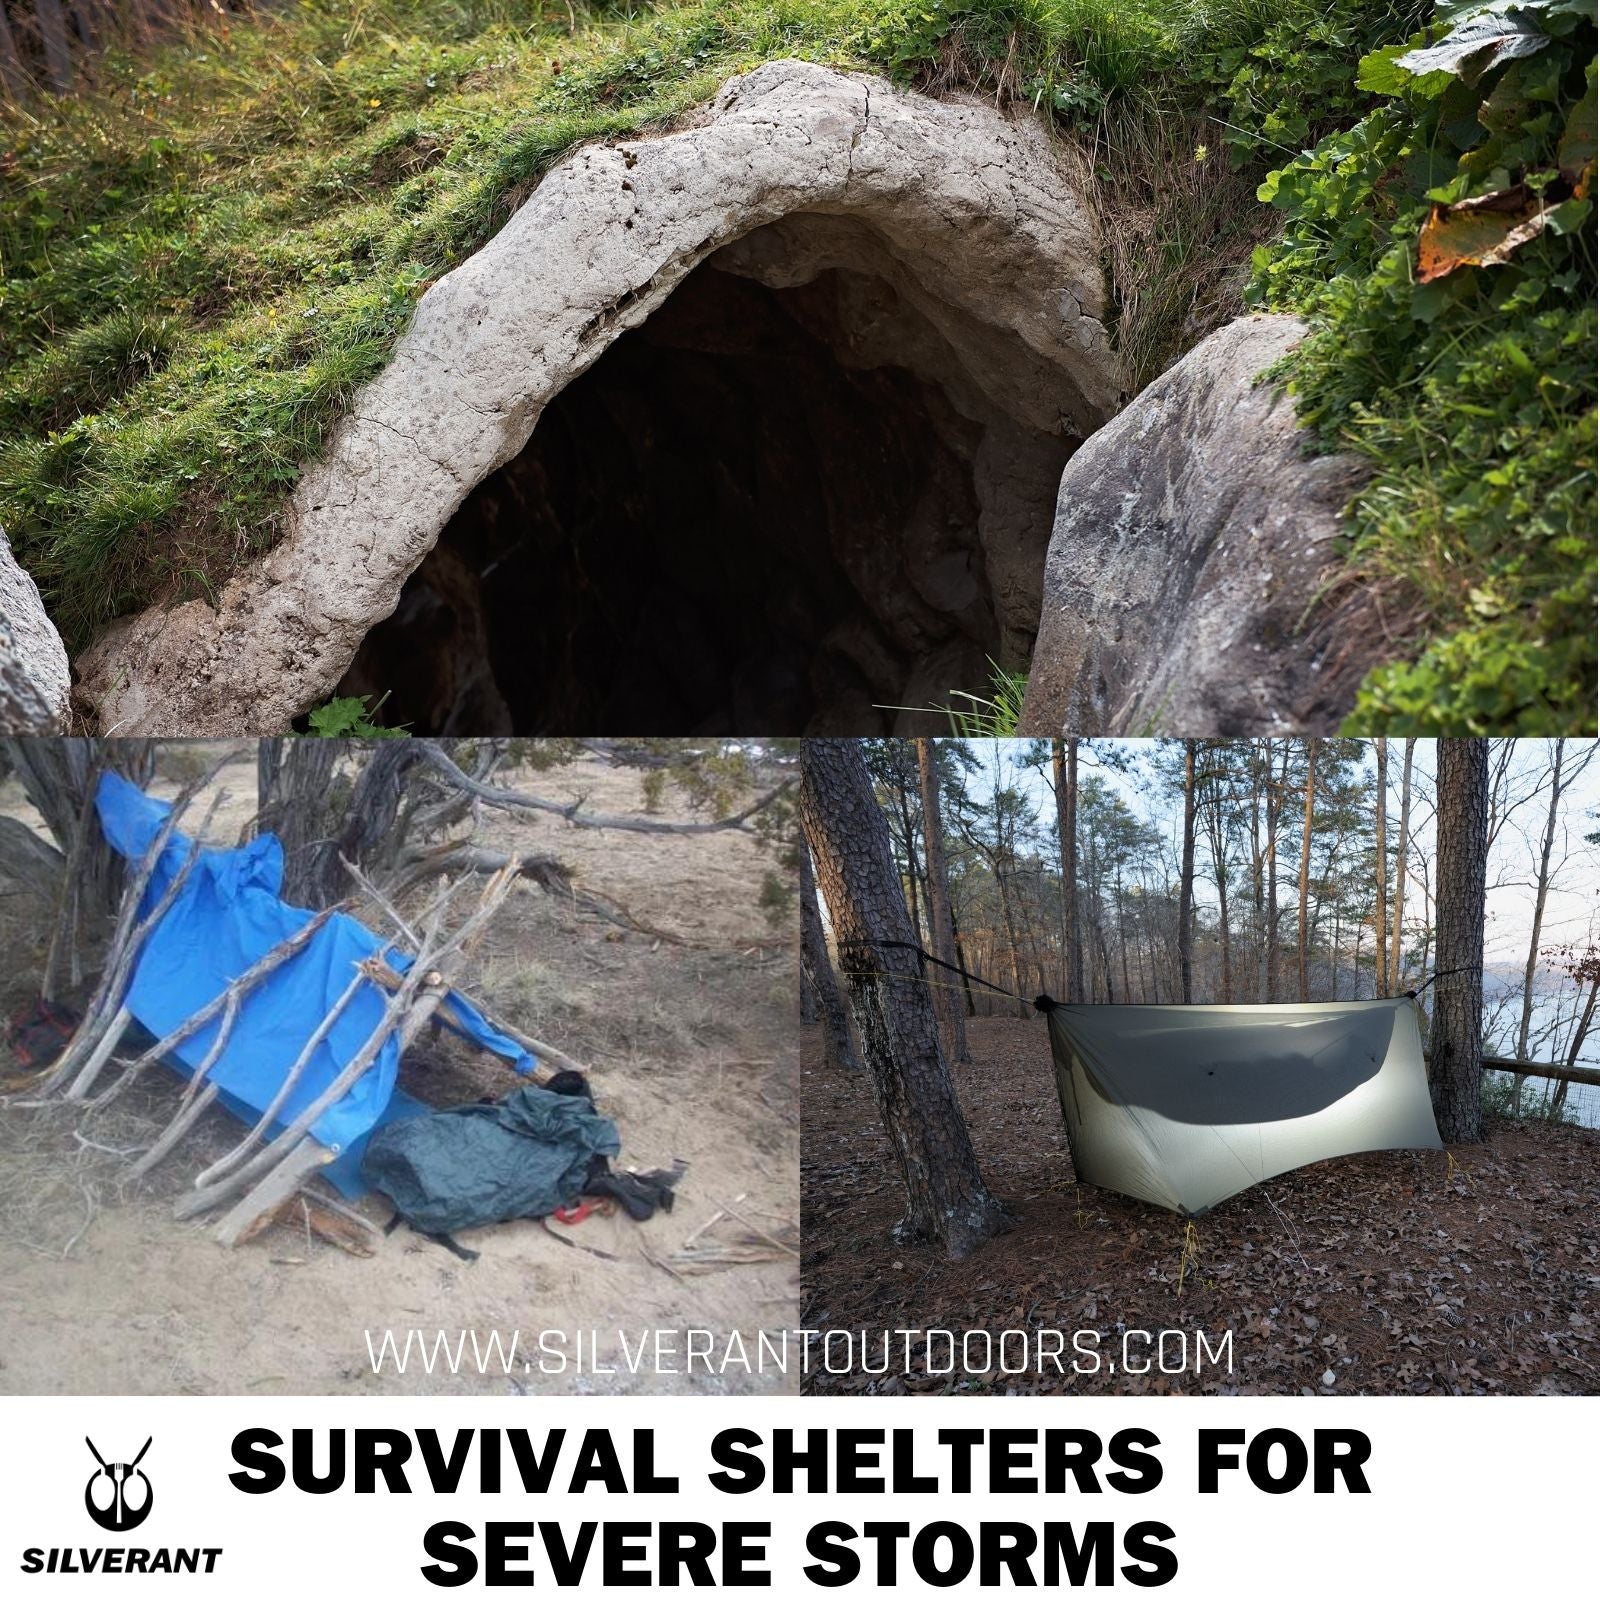 Survival Shelters for Severe Storms